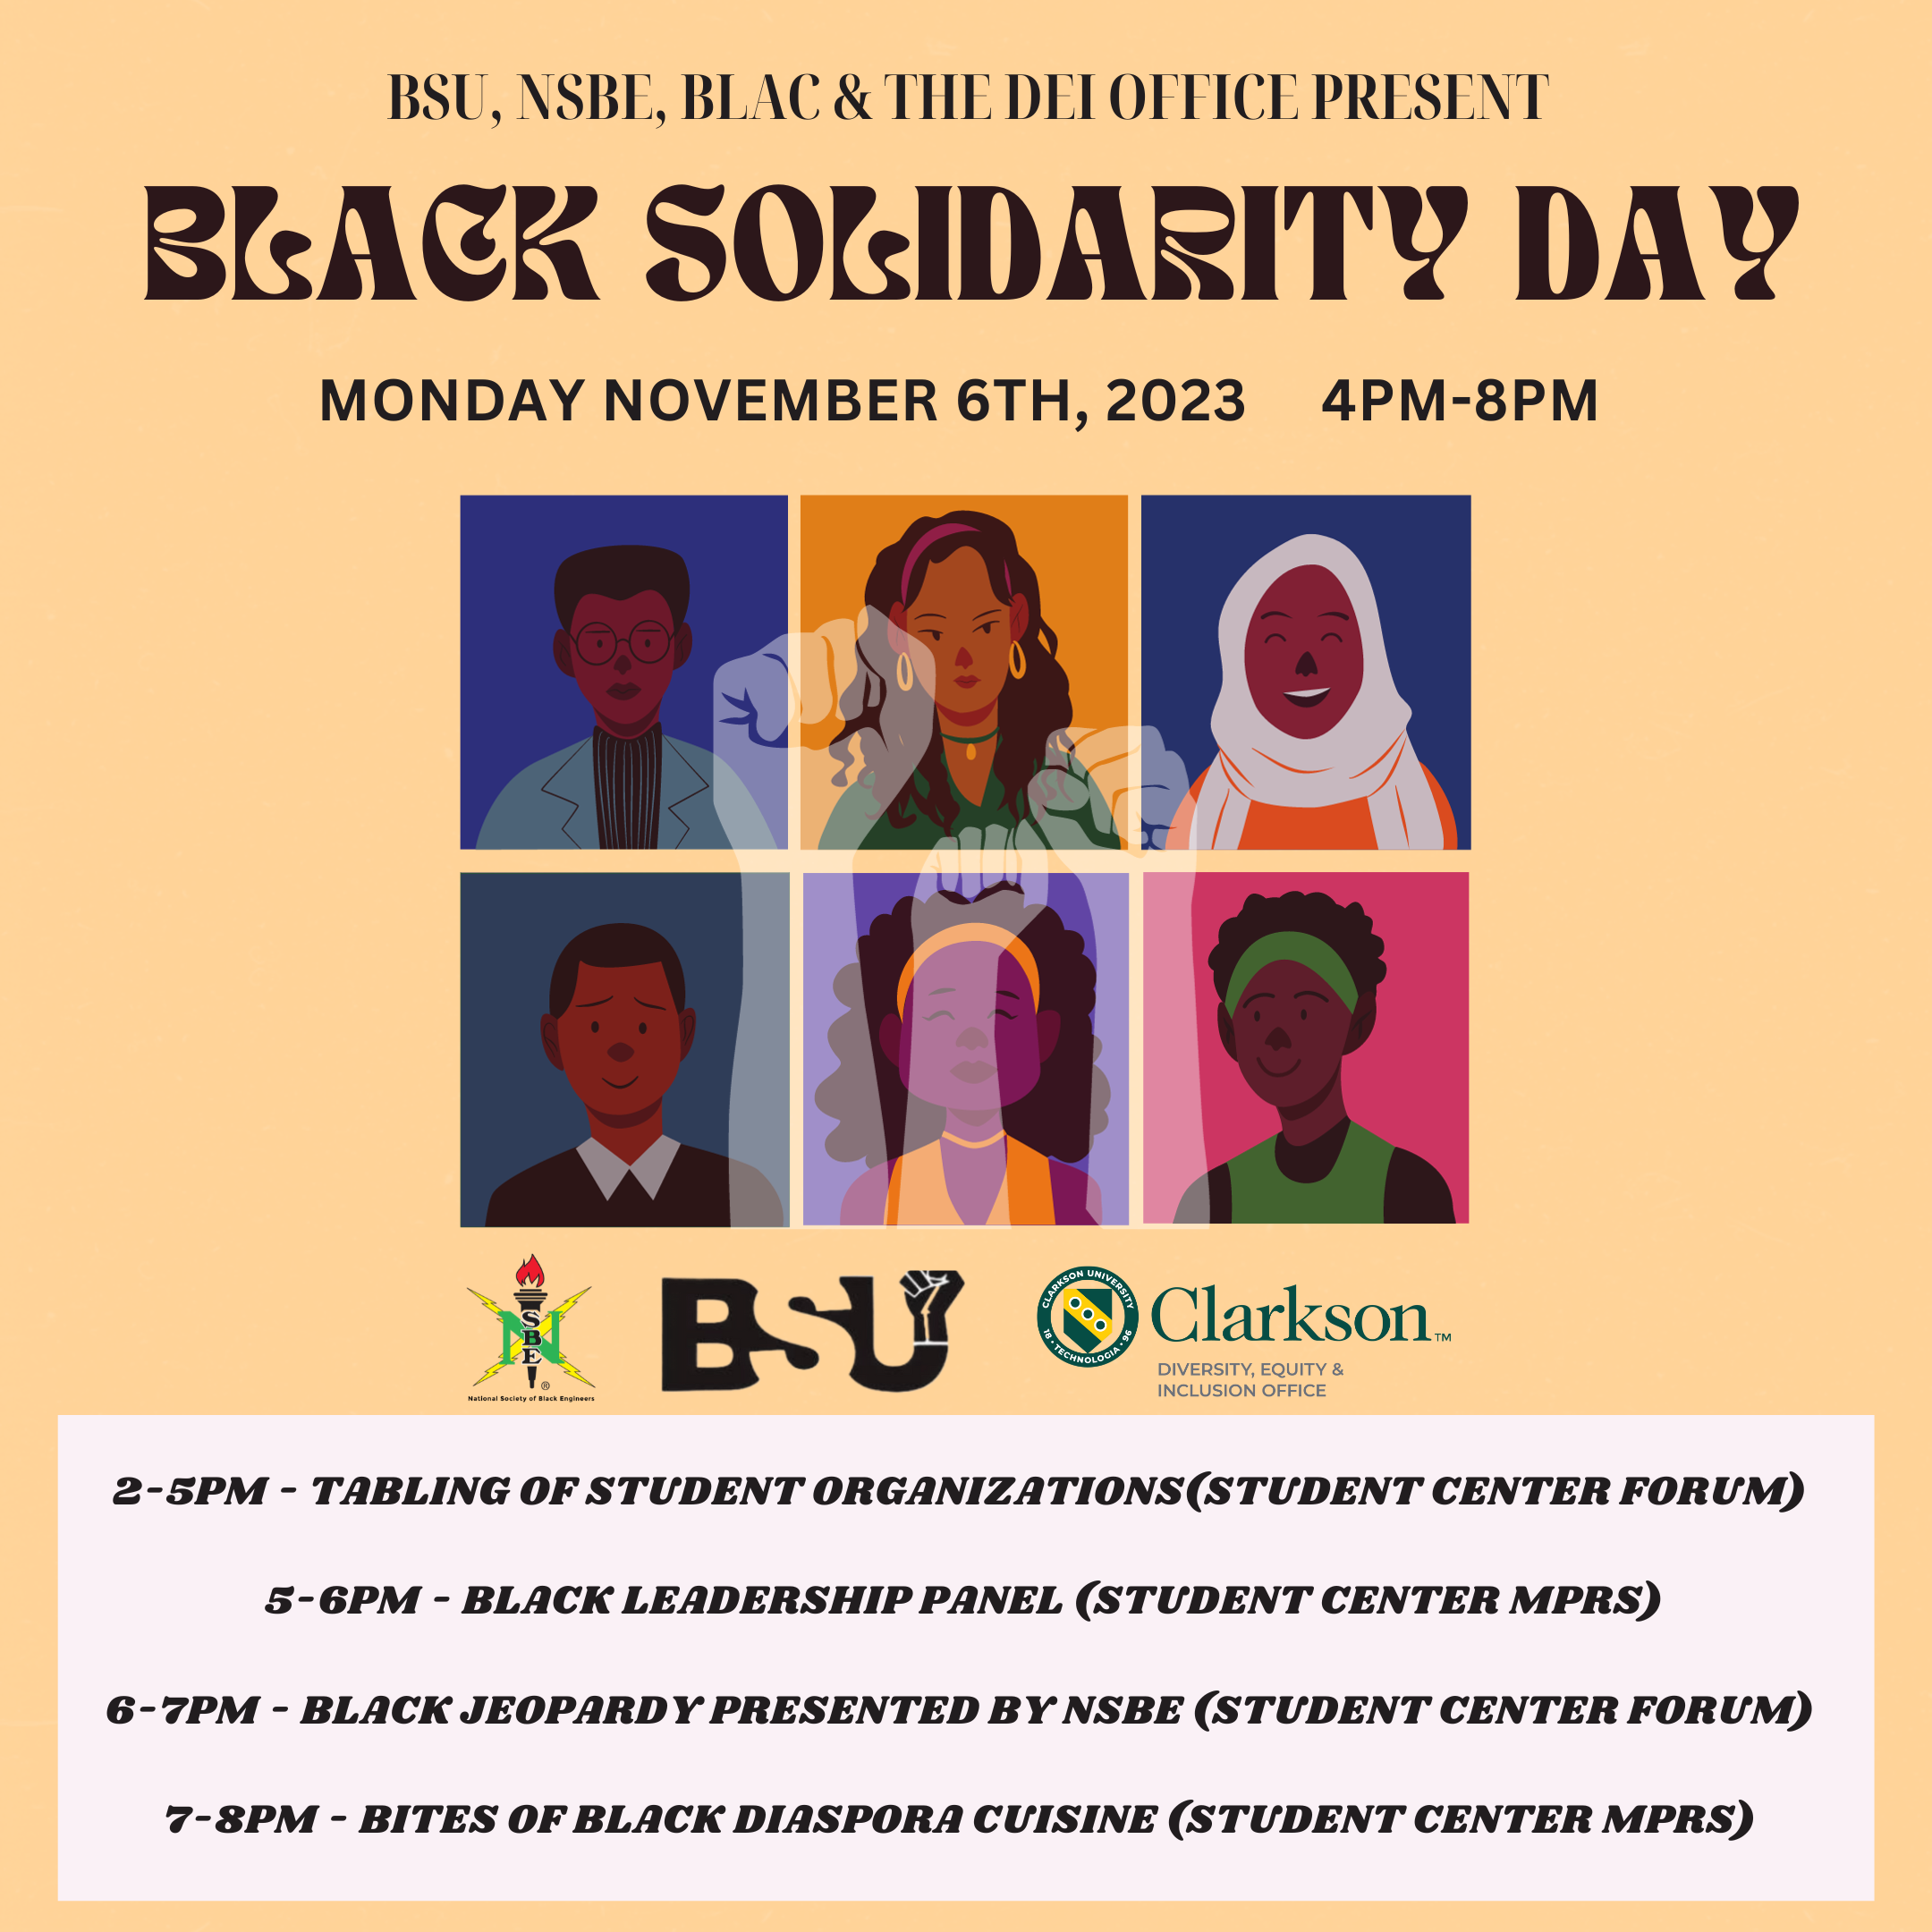 Join the Black Student Union (BSU), the National Society of Black Engineers (NSBE), Black Leaders Advocating for Change (BLAC), with support from the Diversity, Equity, & Inclusion Office for Black Solidarity Day. Black Solidarity Day was created by Activist, ambassador, and professor Dr. Carlos Russell in 1969. He was inspired by a play written by Douglas Turner Ward, “Day of Absence.” The day is meant to highlight the contributions of the Black community within society. When: Monday, November 6th, 2023 Time: 2:00 pm - 8:00 pm Where: Student Center Forum Schedule of Events: 2-5 PM - Tabling of student organizations (Student Center Forum) 5-6 PM - Black Leadership Panel (Student Center MPRs) 6-7 PM - Black Jeopardy presented by NSBE (Student Center Forum) 7-8 PM - Bites of Black Diaspora Cuisine (Student Center MPRs)